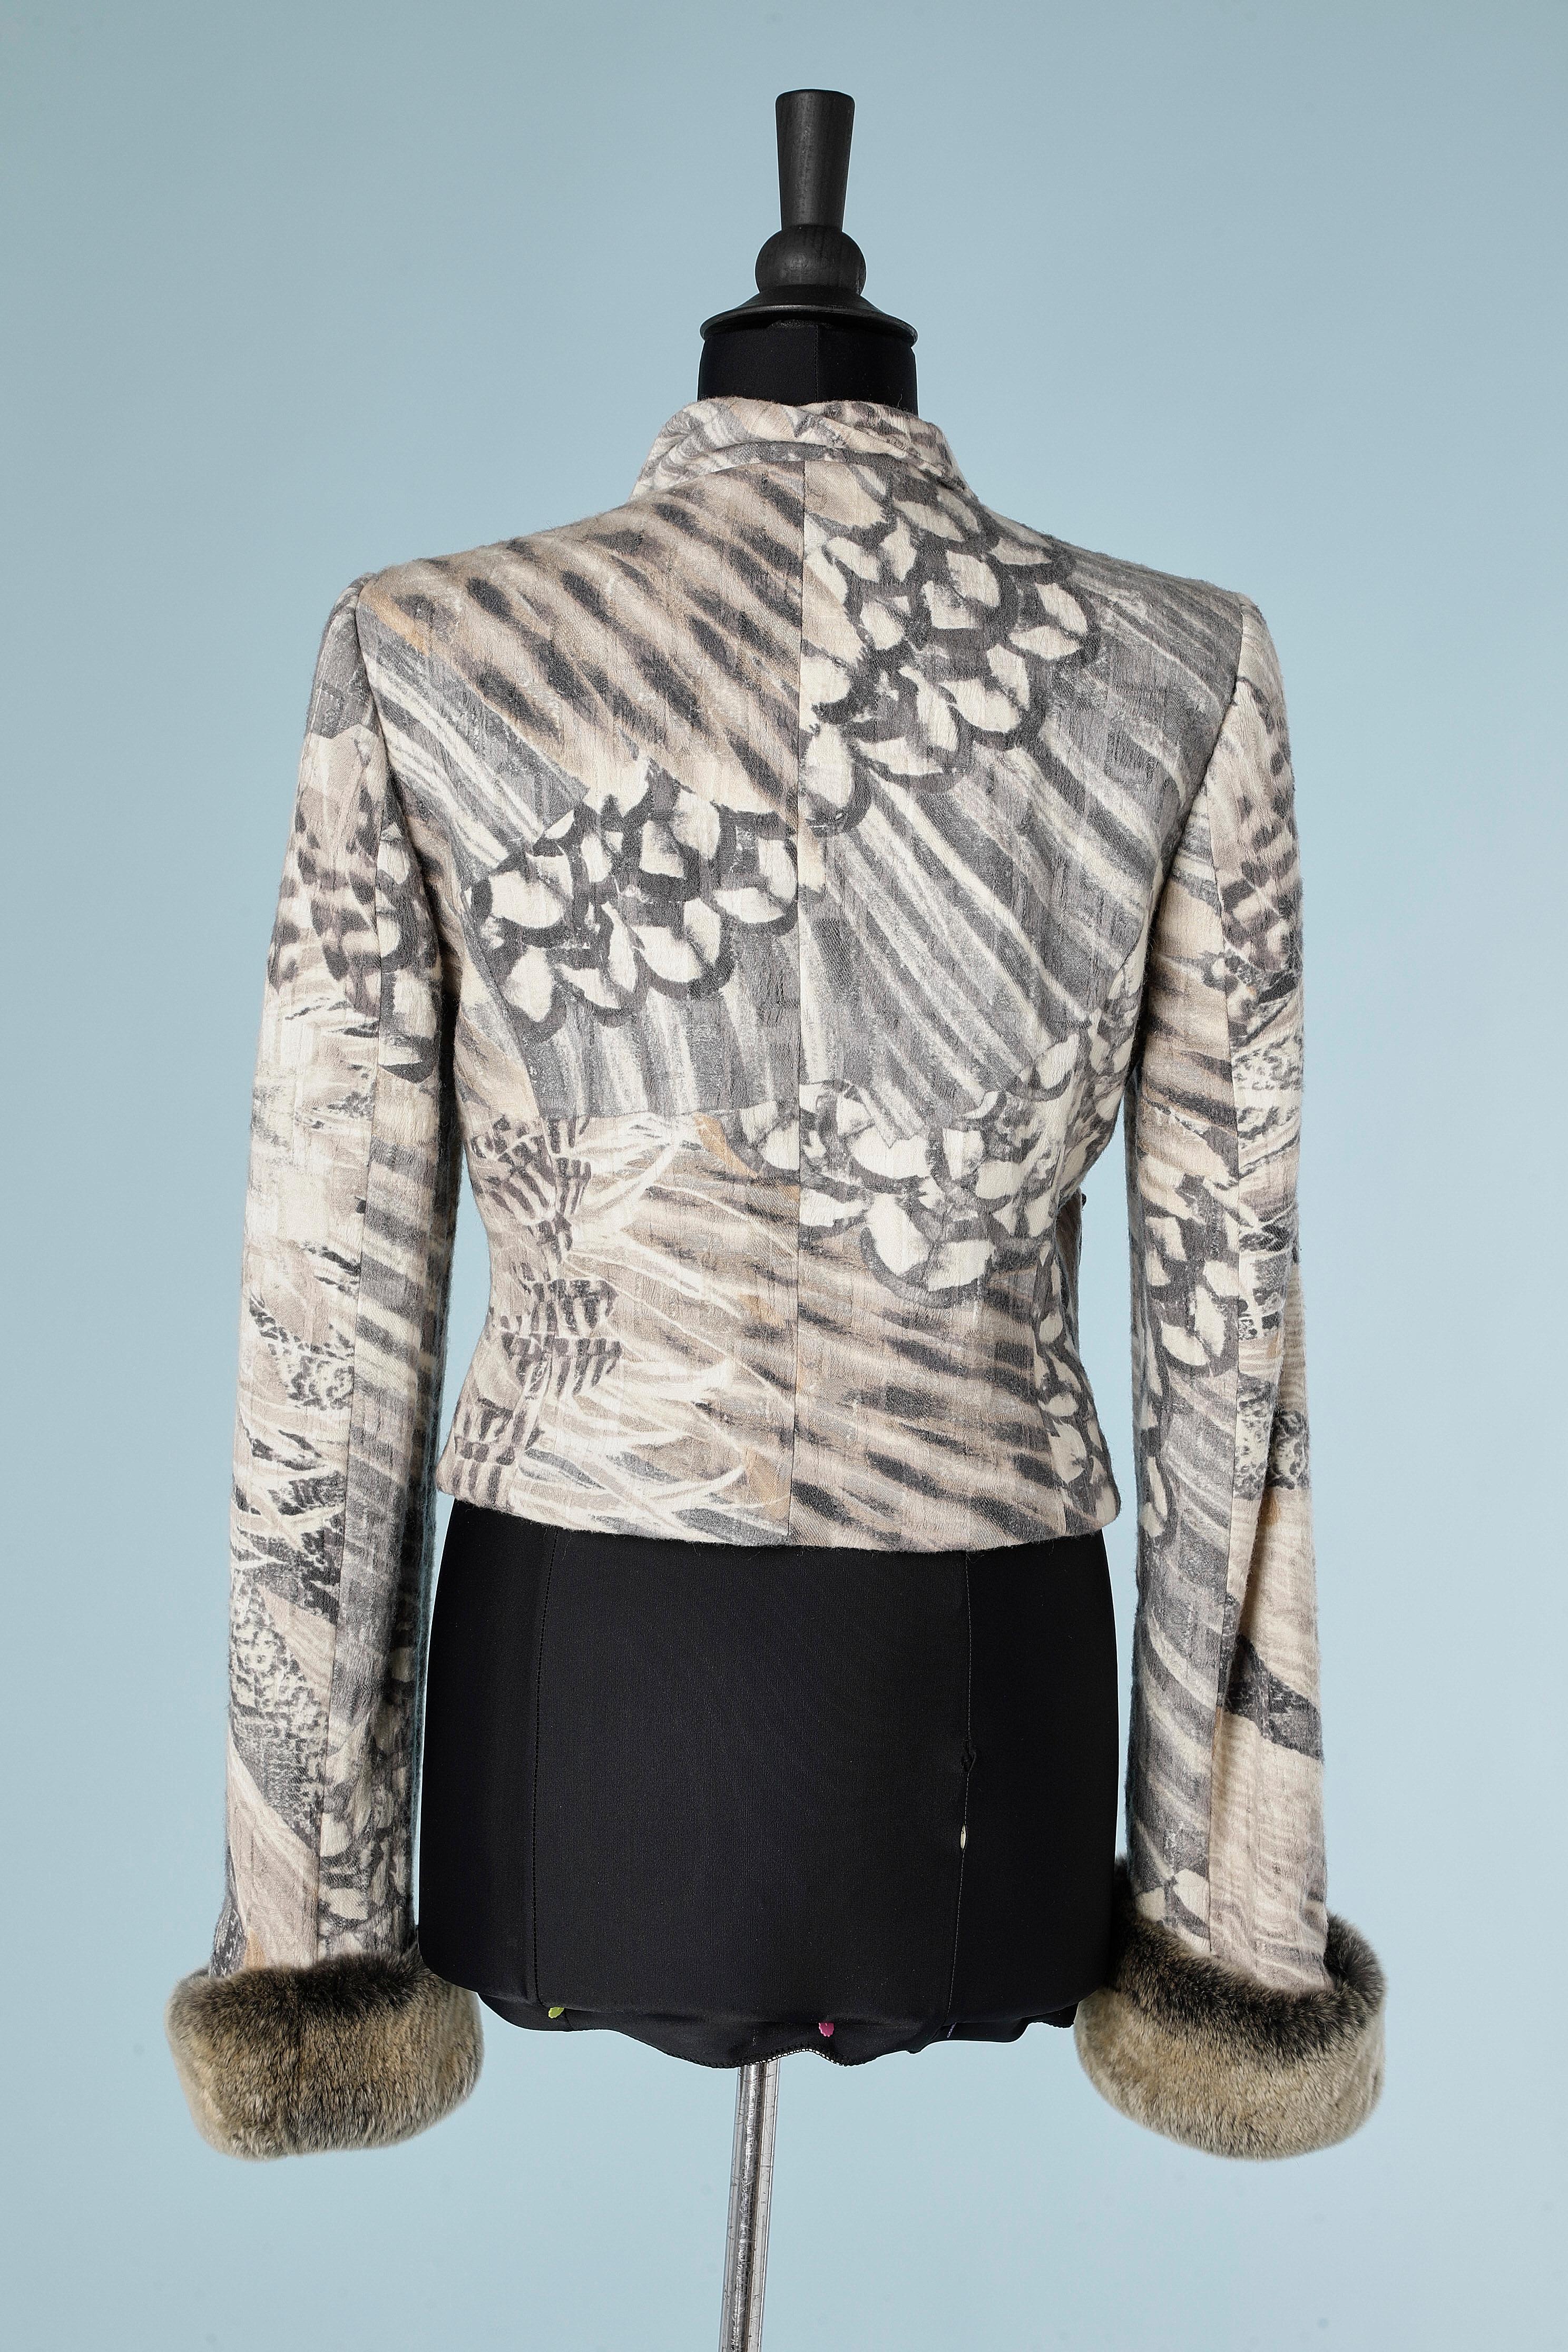 Printed jacket in wool and cotton with furs's cuffs Roberto Cavalli Class  In Excellent Condition For Sale In Saint-Ouen-Sur-Seine, FR